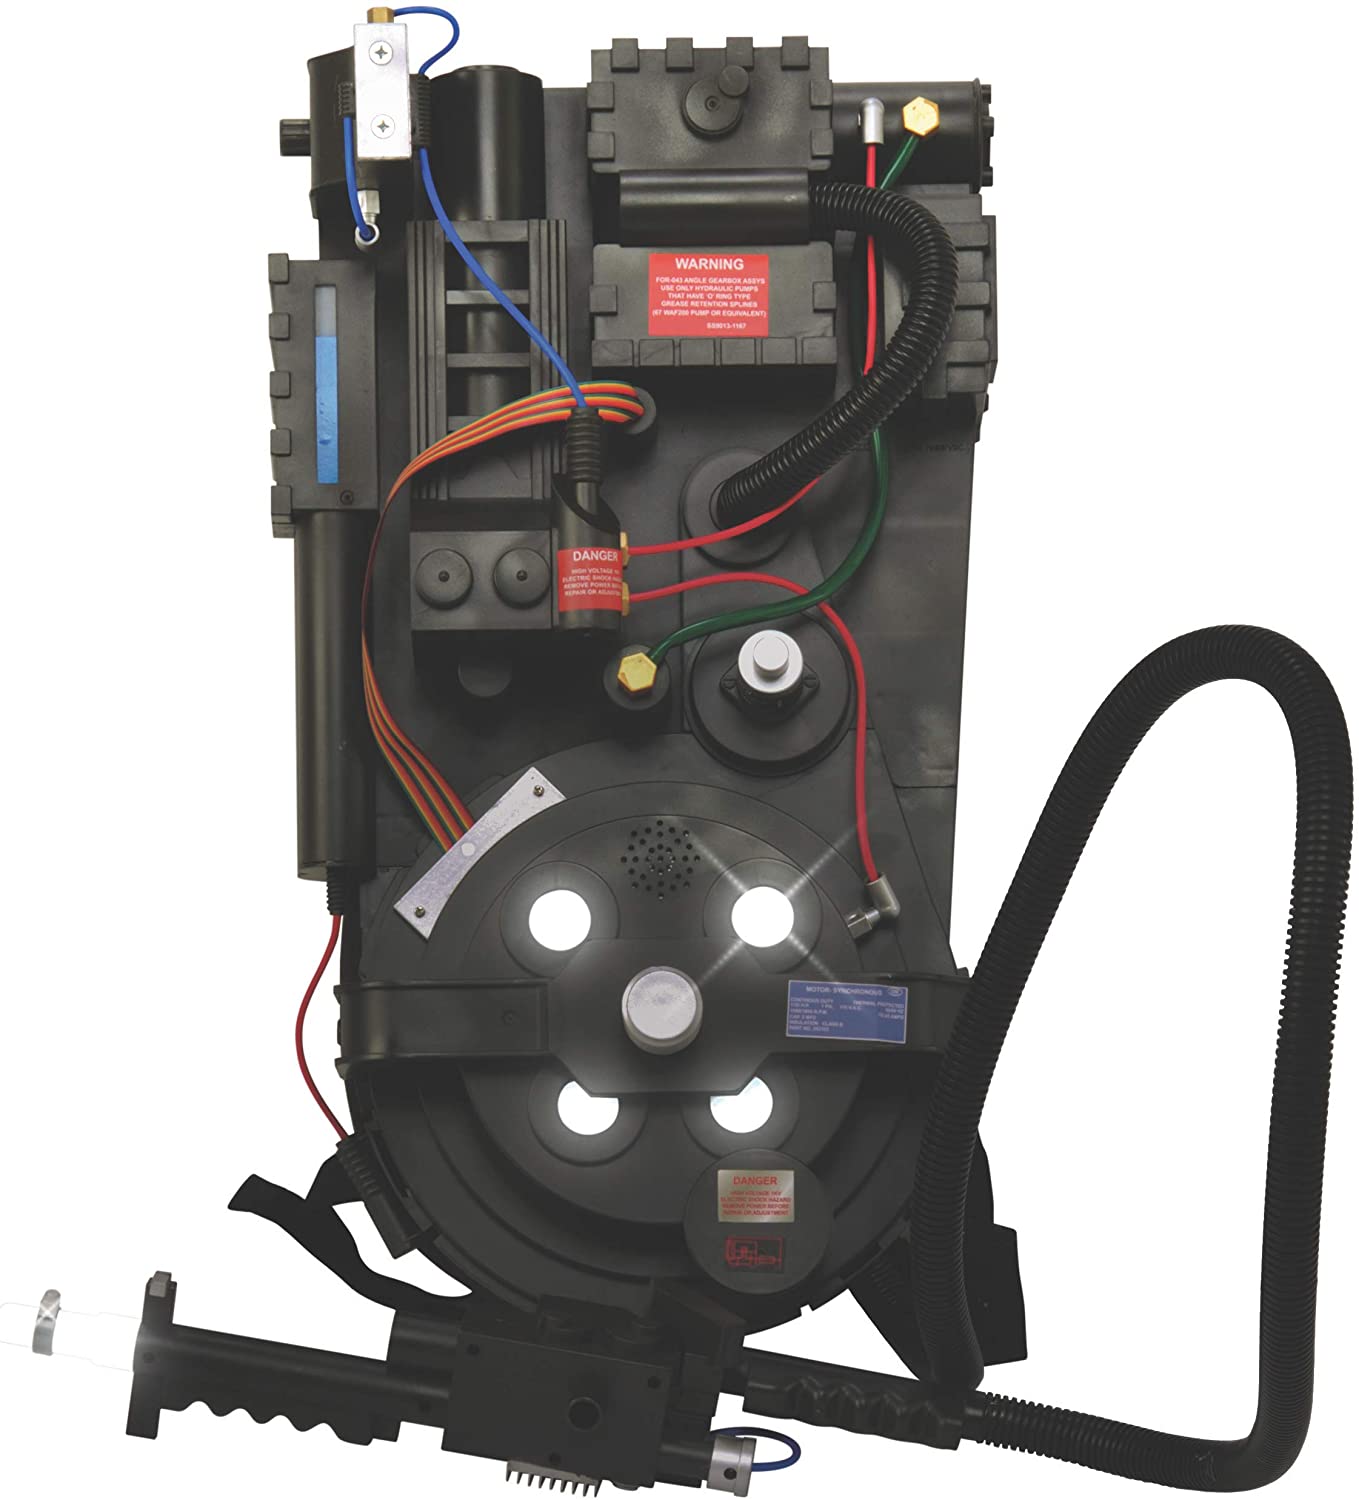 ghostbuster proton pack - Warning Forange Gearbor Assy Use Only Hydraulic Pumps That Have O Ring Type Crease Retention Spune Or Egunvalent Non Danger 6 Danger